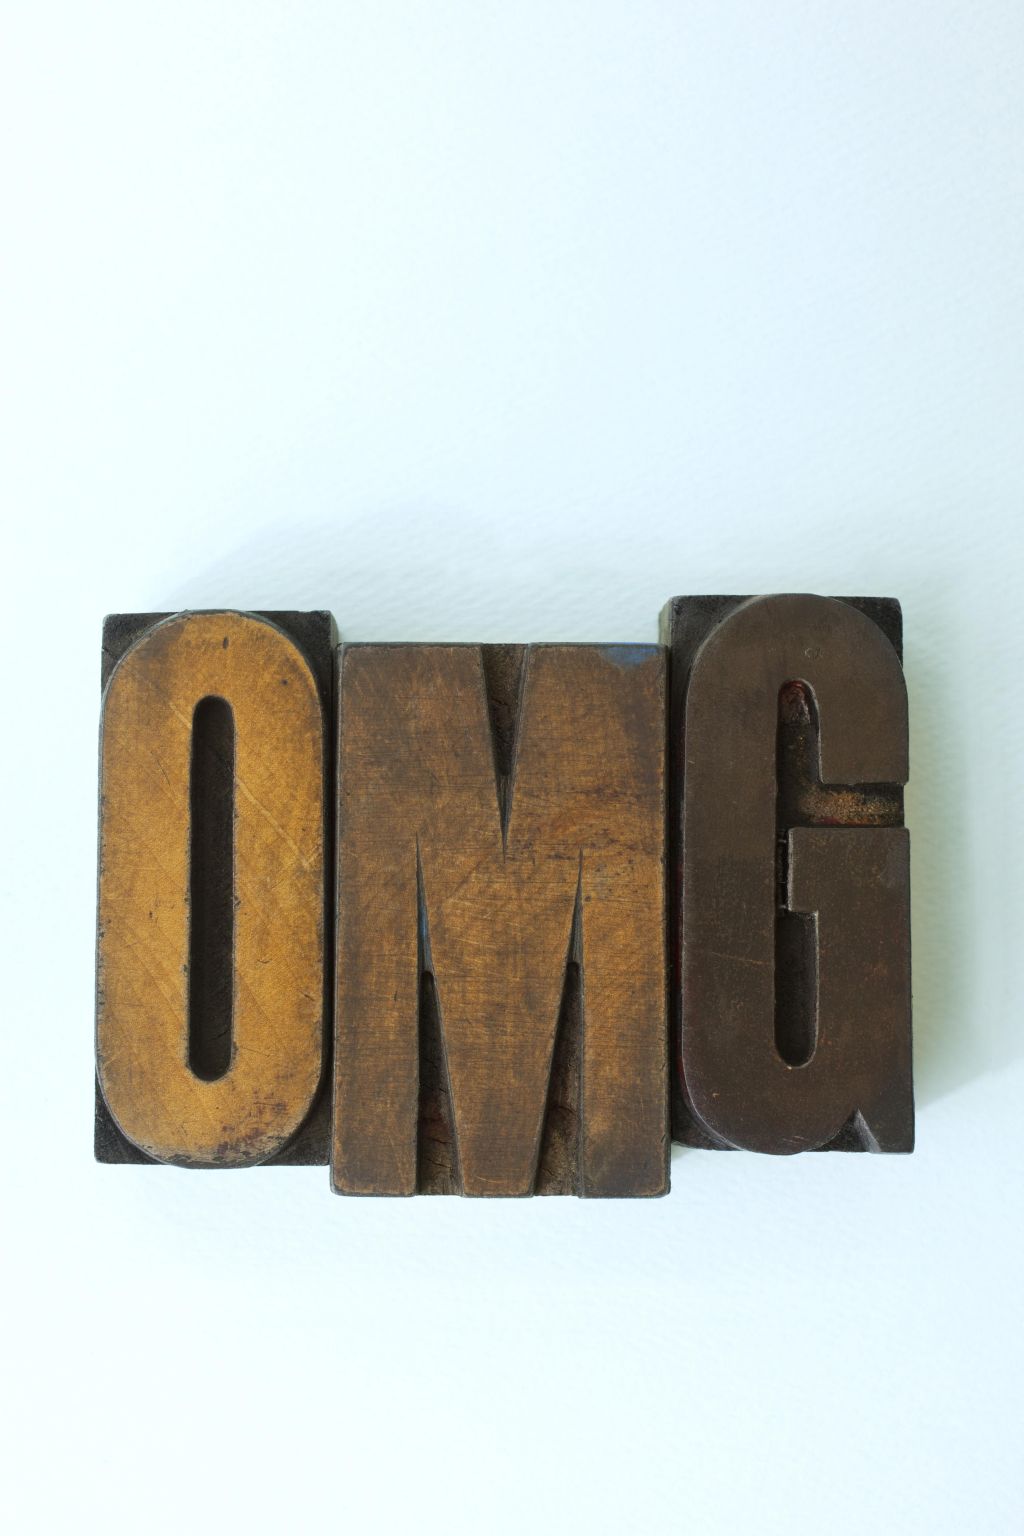 Oh My God in old school printing block letters.